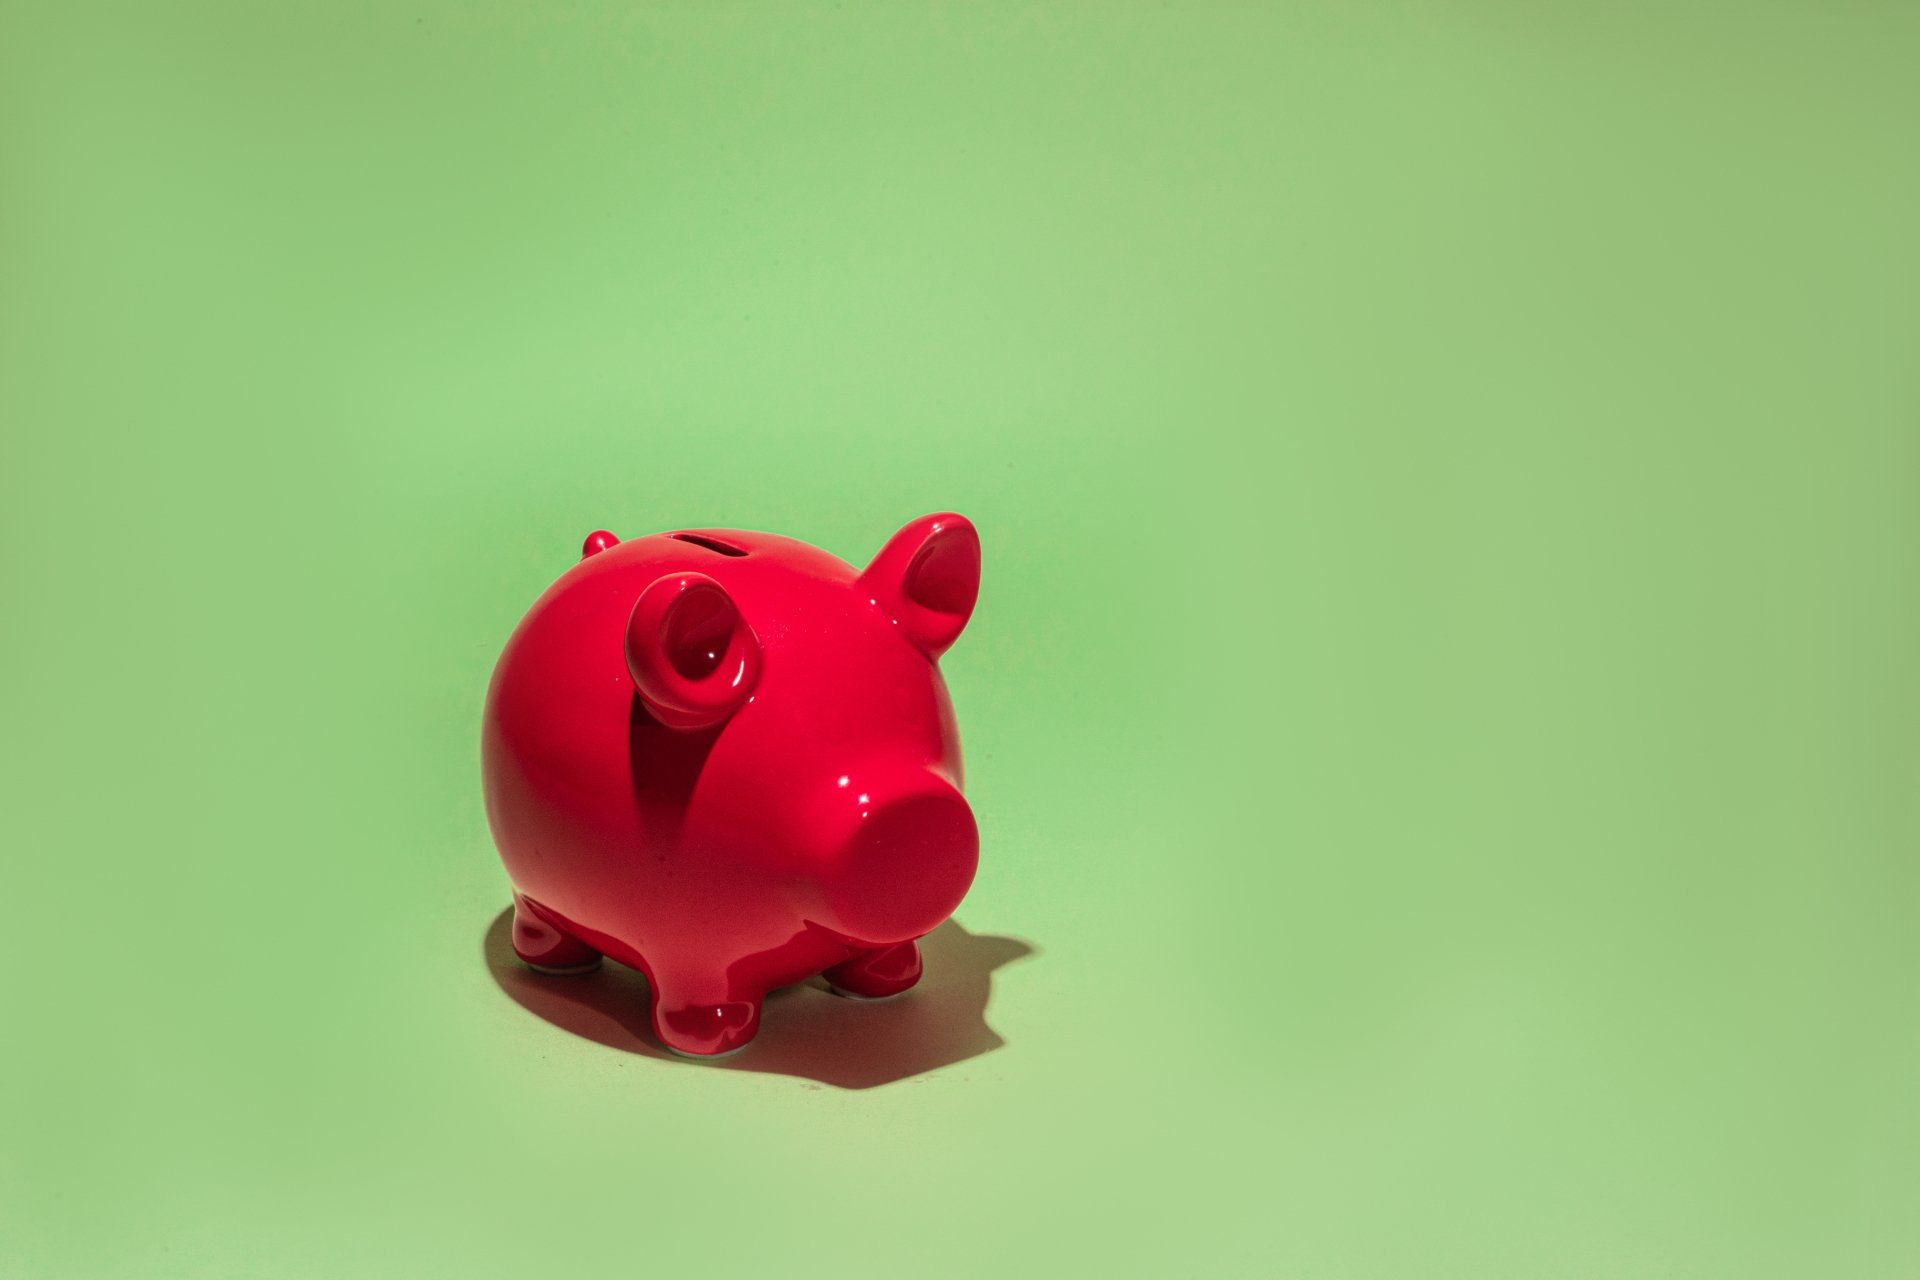 a red piggy bank is sitting on a green surface